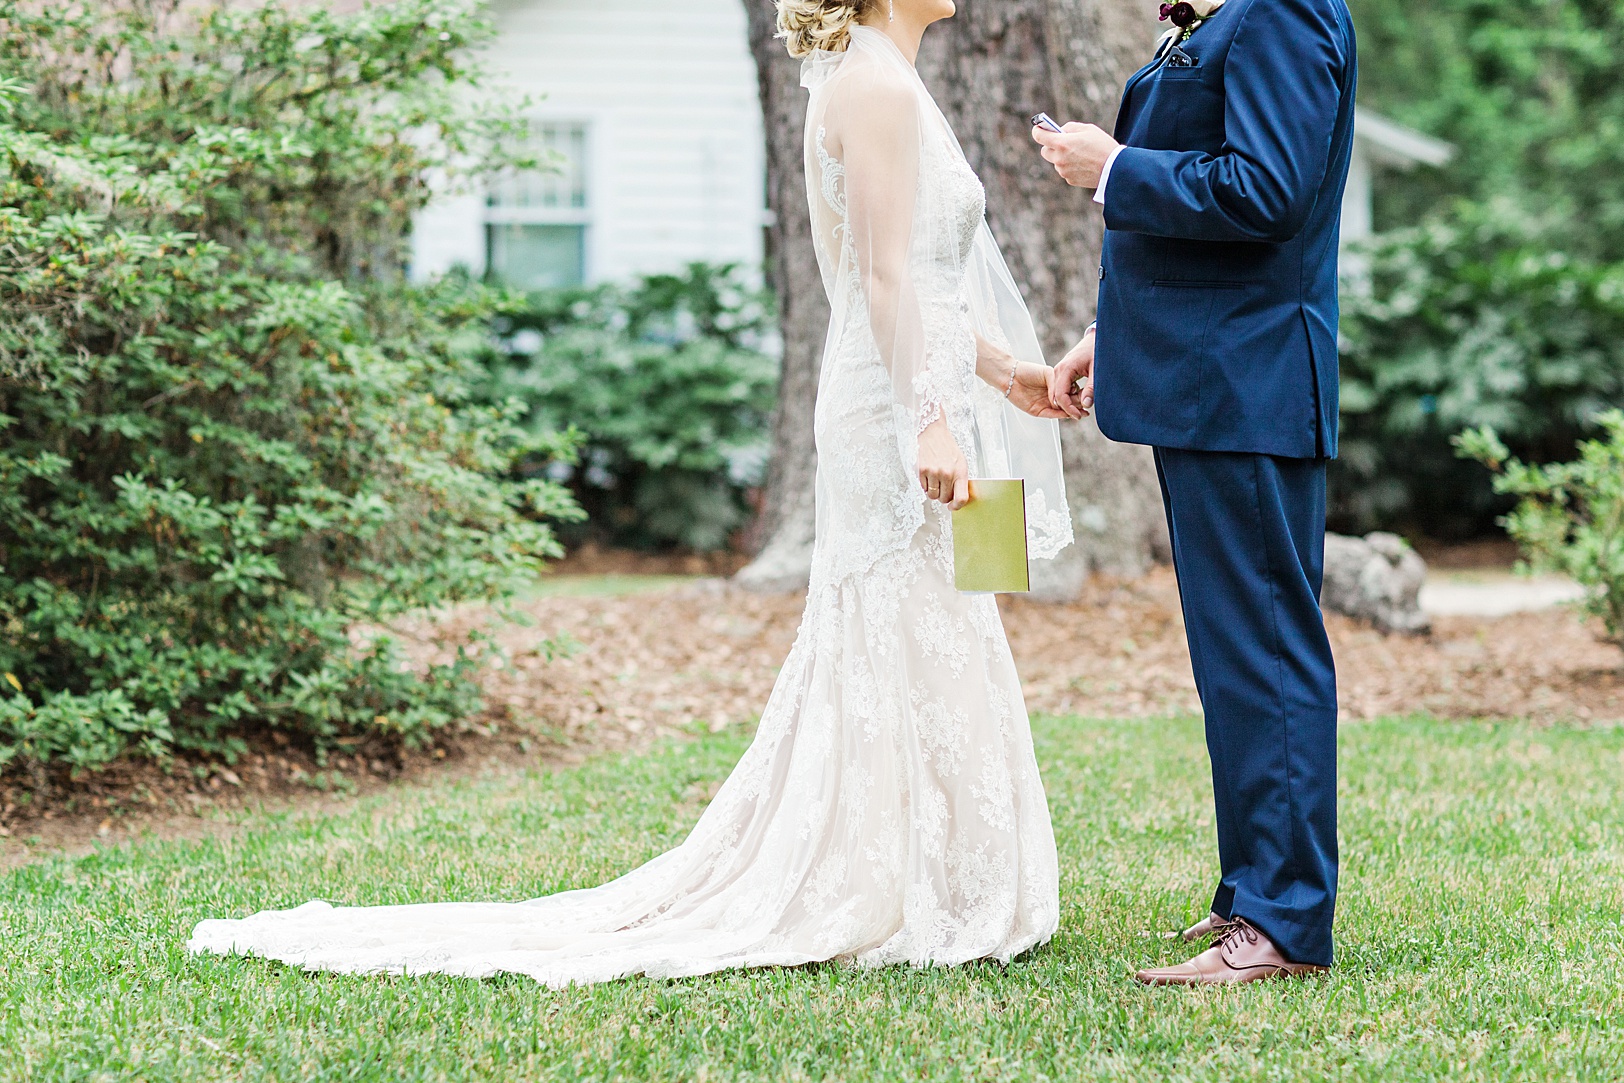 Bride and Groom Private Vows | Kaitlin Scott Photography